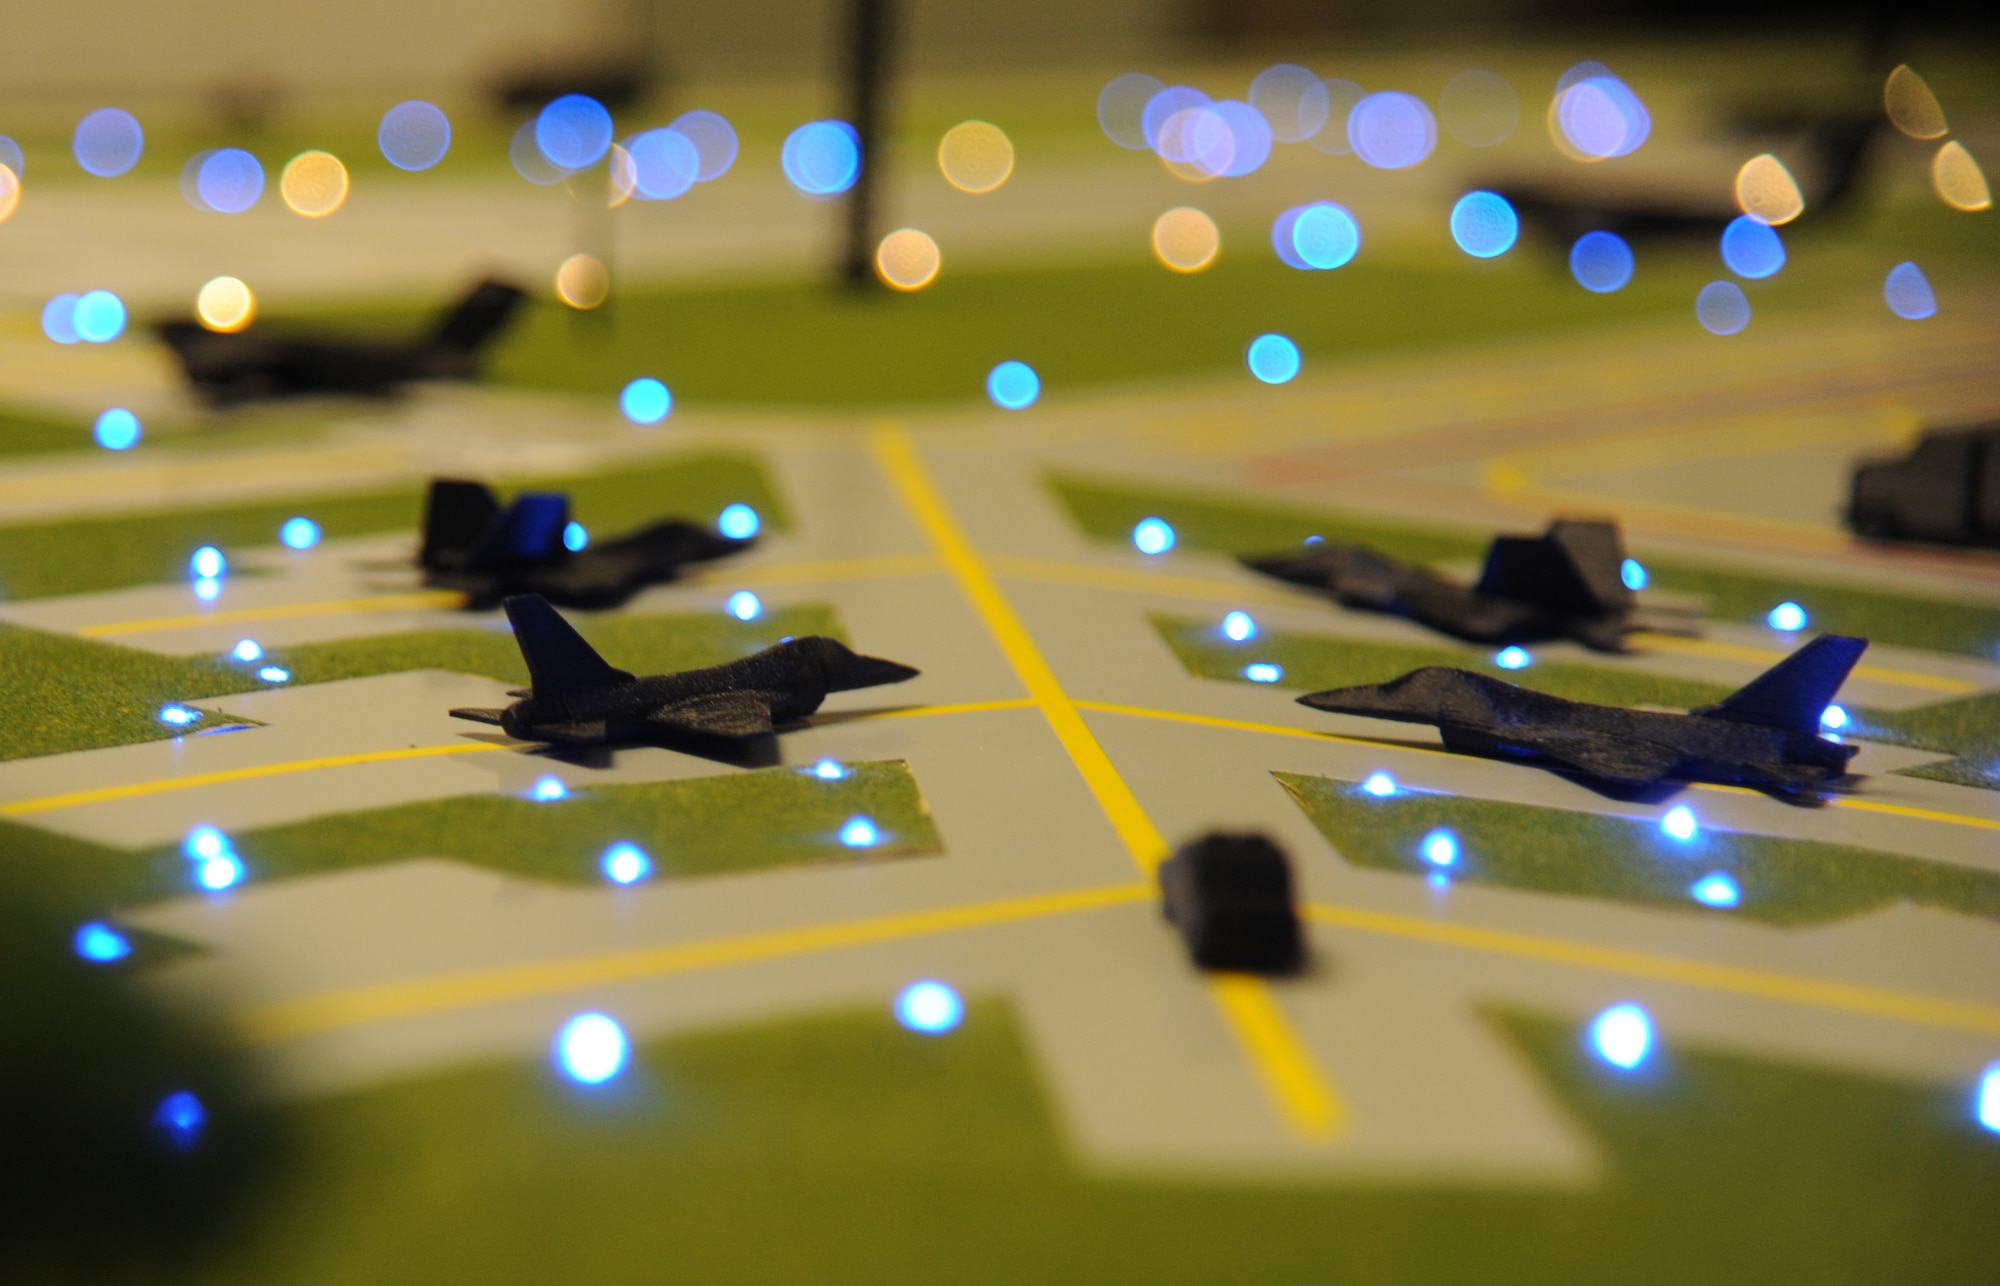 3-D printed aircraft models sit on top of an illuminated airfield training aid table used in the 334th Training Squadron airfield management course Dec. 12, 2014, at Cody Hall, Keesler Air Force Base, Miss.  Utilizing the model, which is a scaled representation of an airfield, will increases understanding, productivity and efficiency in the classroom. (U.S. Air Force photo by Kemberly Groue)